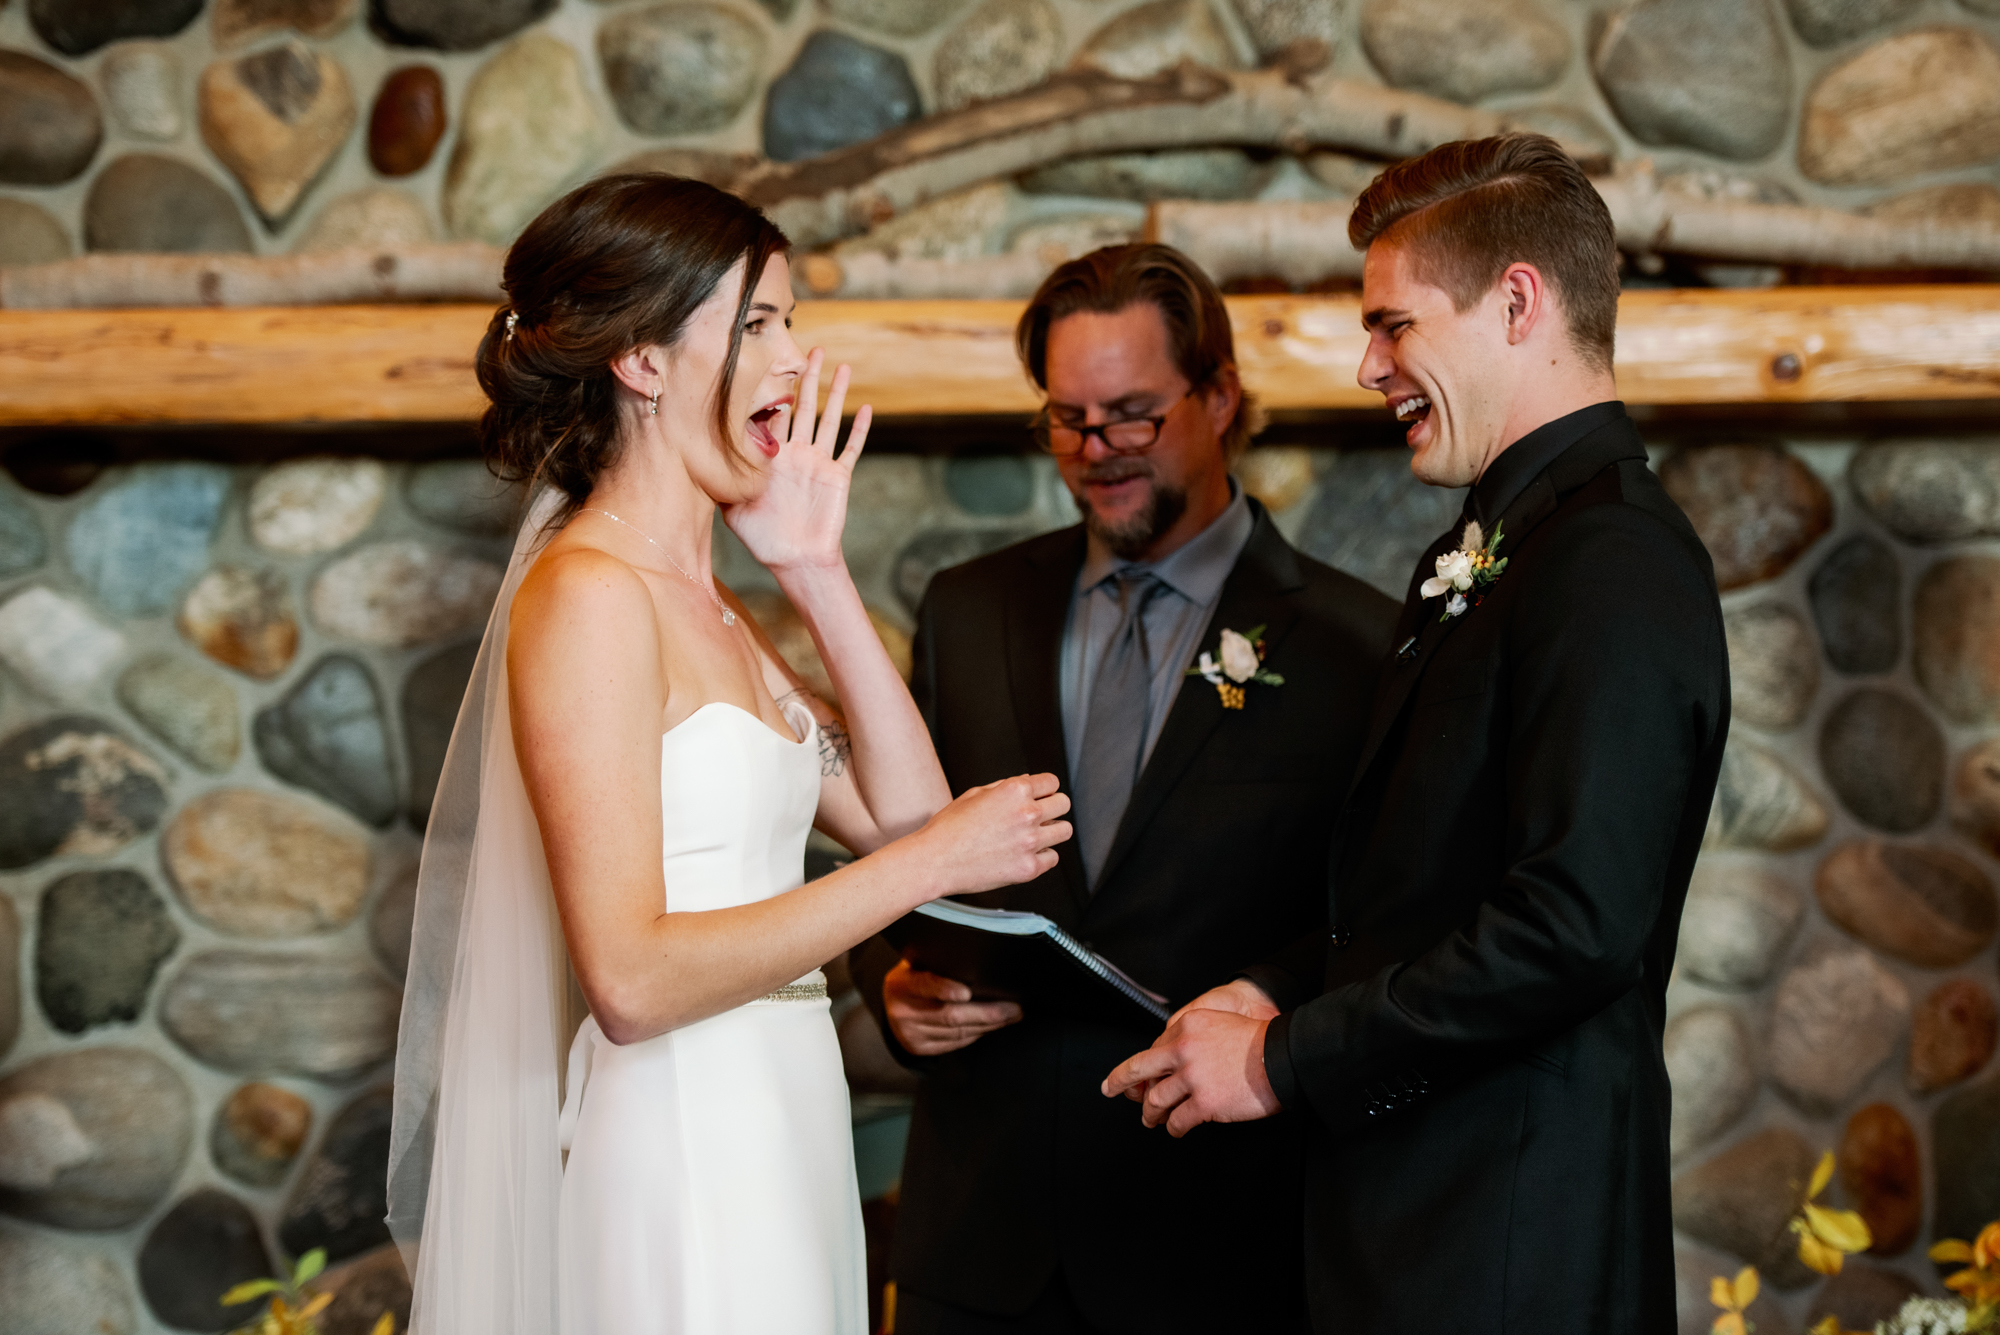 Mountain Springs Lodge weddings: Fletcher and Veronica during their ceremony